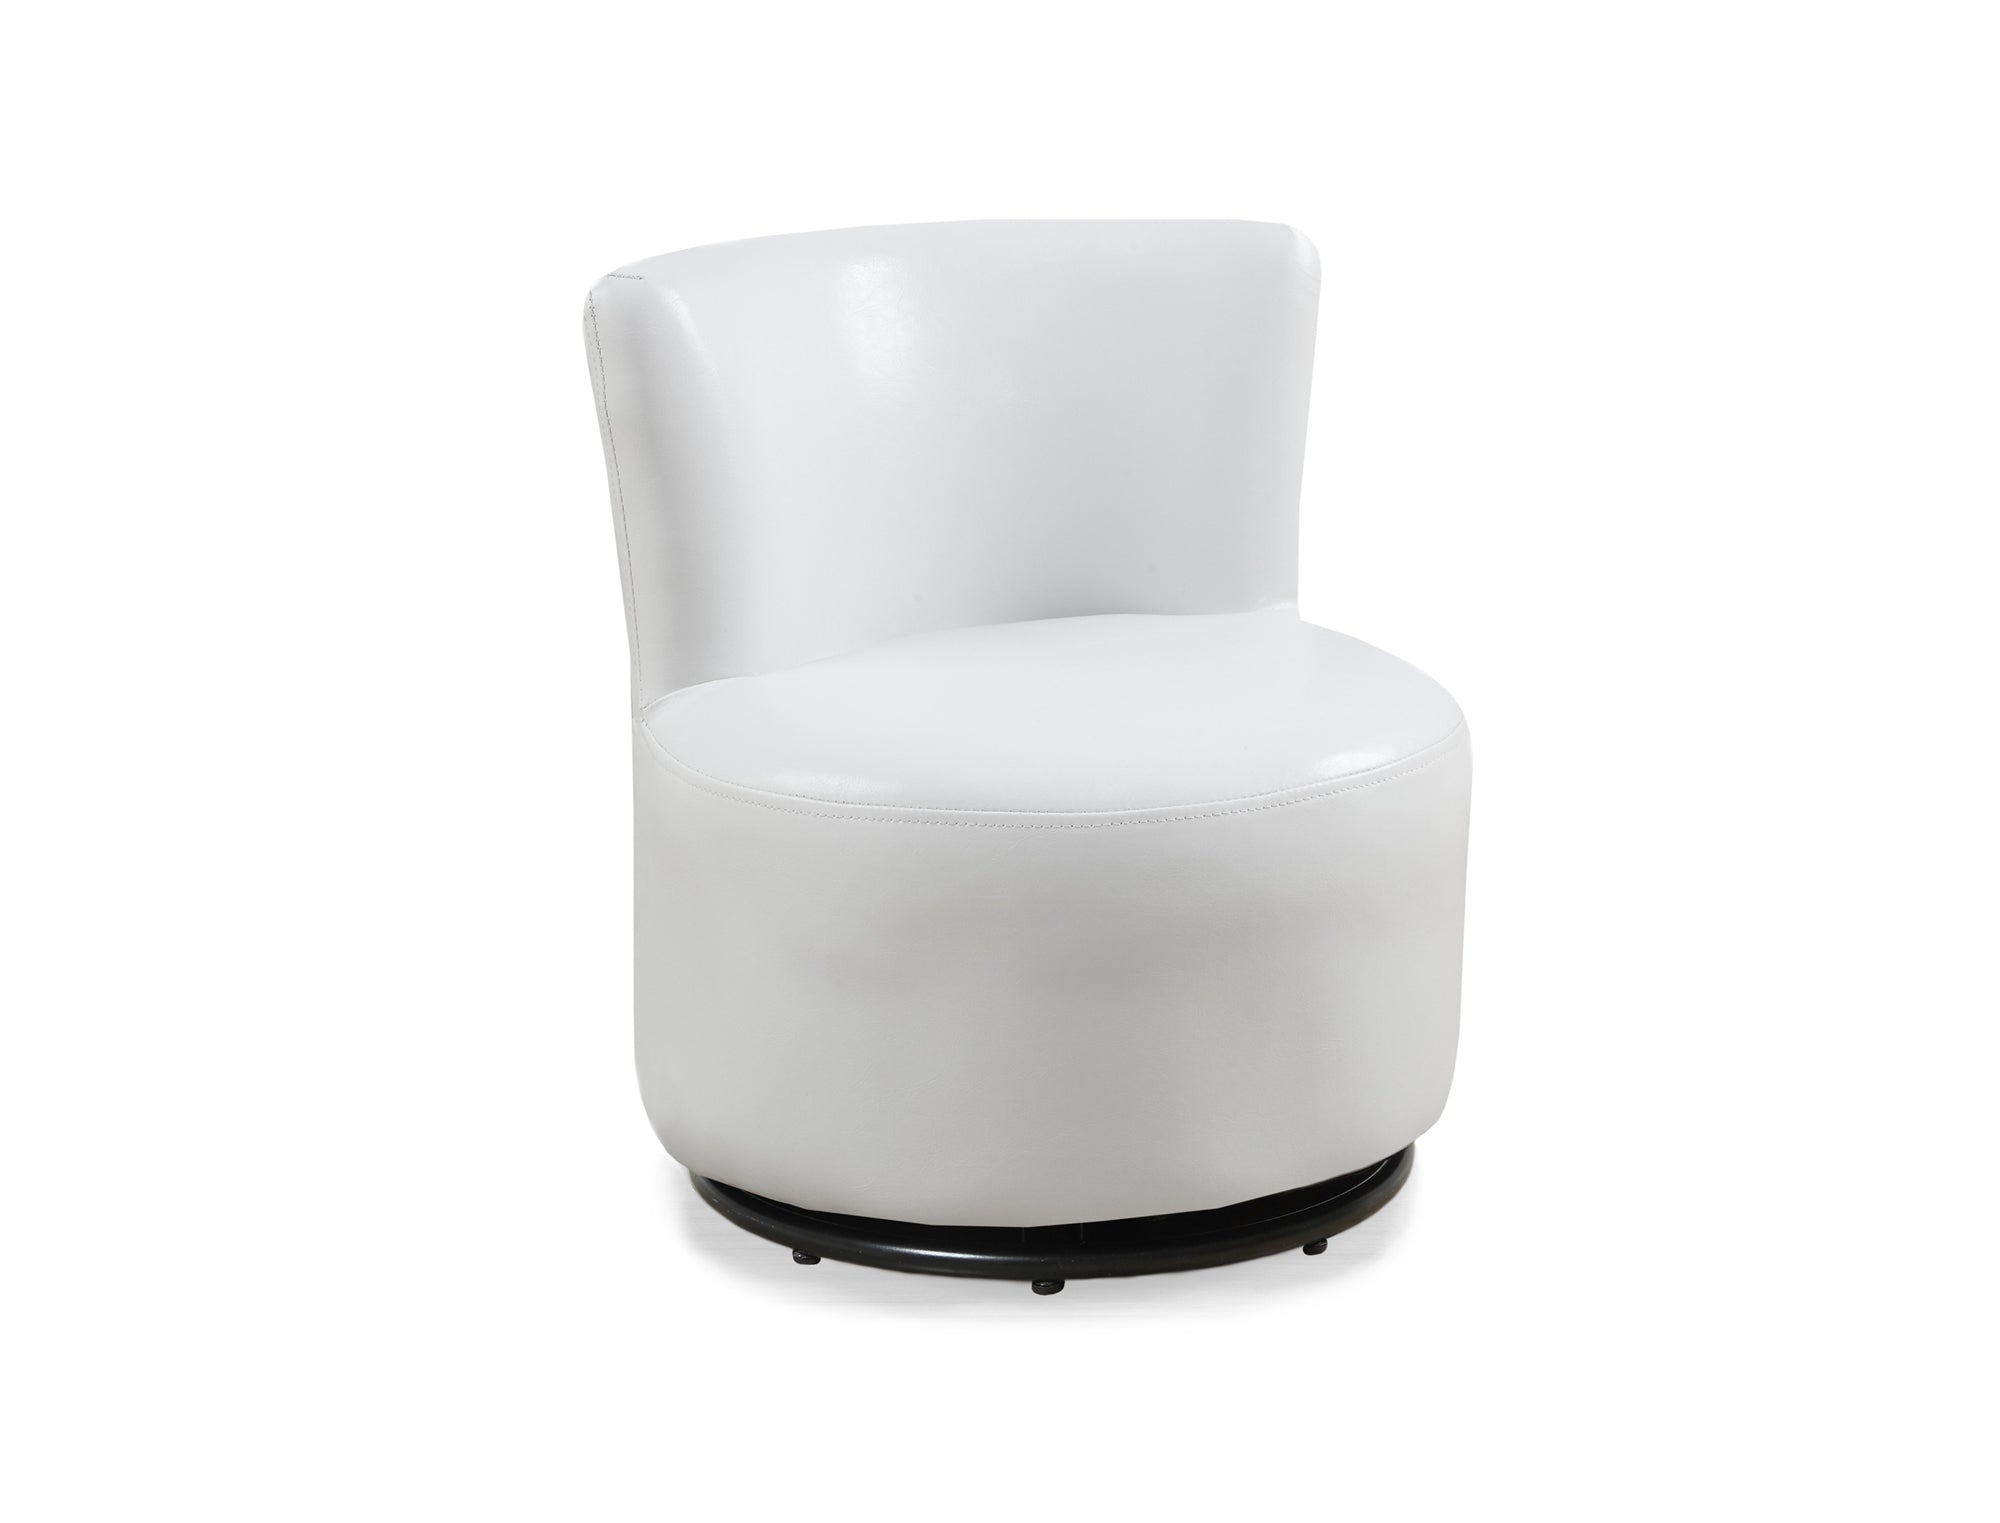 MN-938153    Accent Chair, Kids Chair, Pu Leather-Look, Swivel, Upholstered, Juvenile, Leather-Look, White, Contemporary, Modern